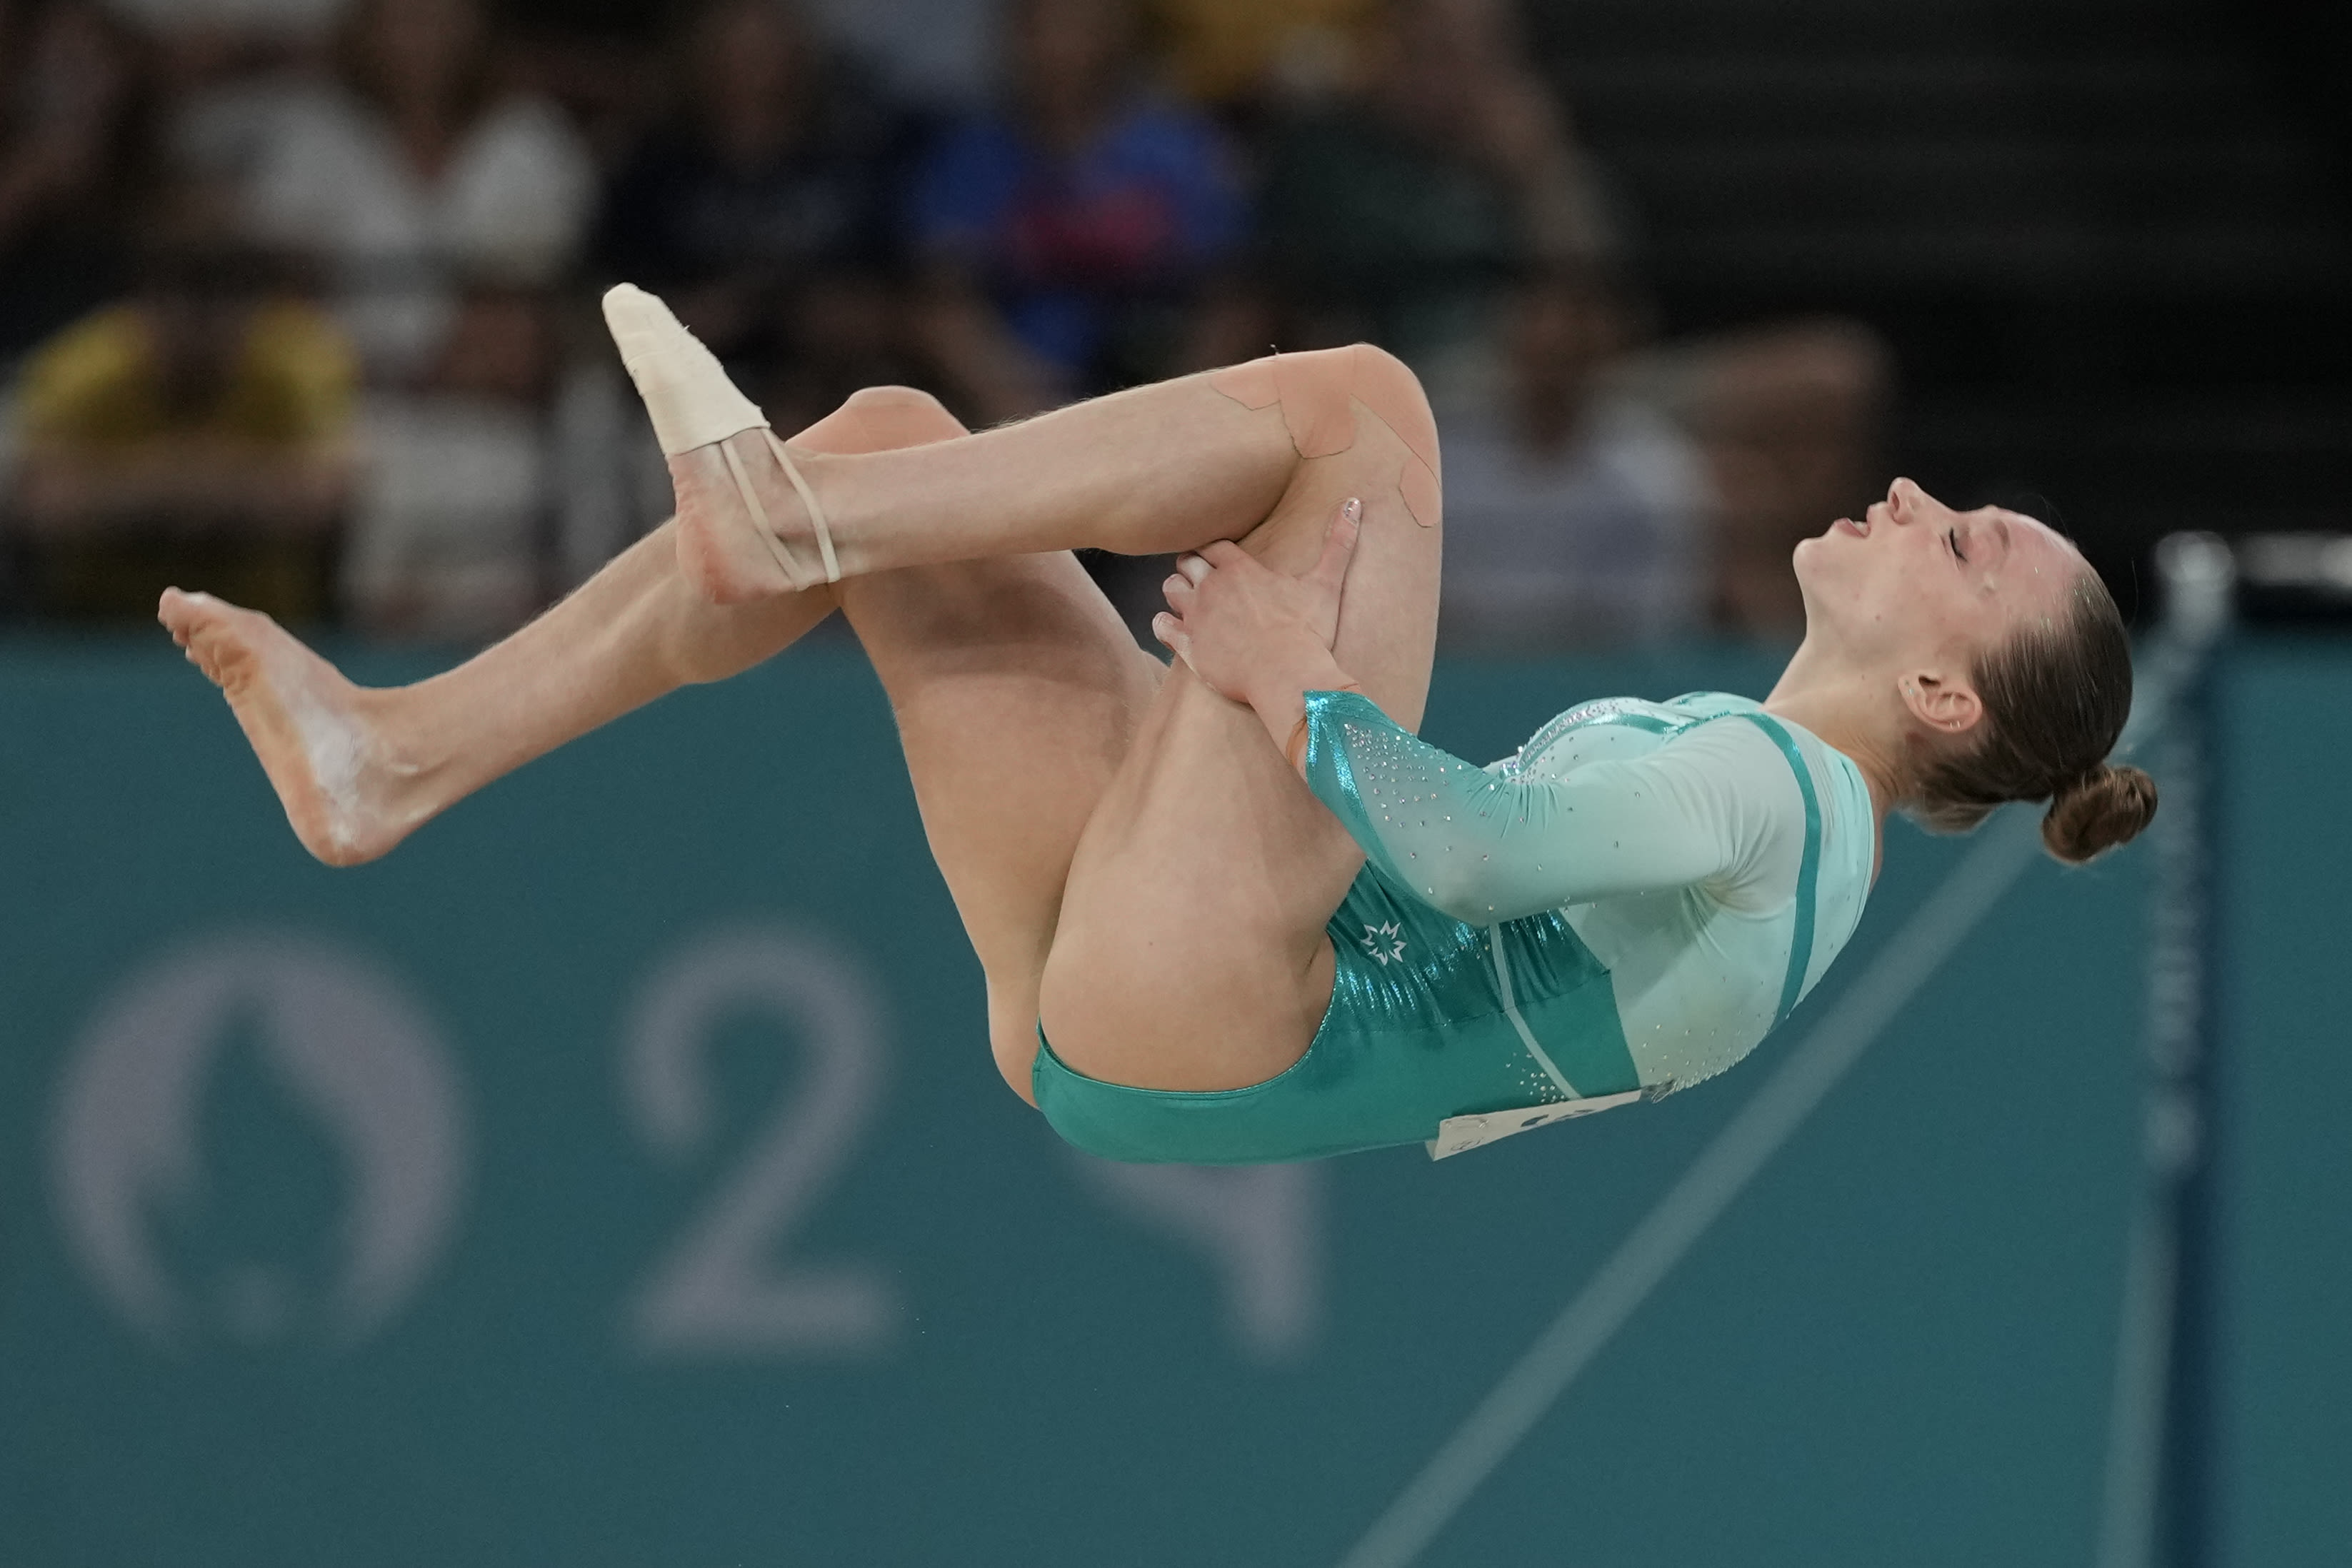 French-Algerian gymnast Kaylia Nemour may be a dual national, but her gold medal is all Algeria's